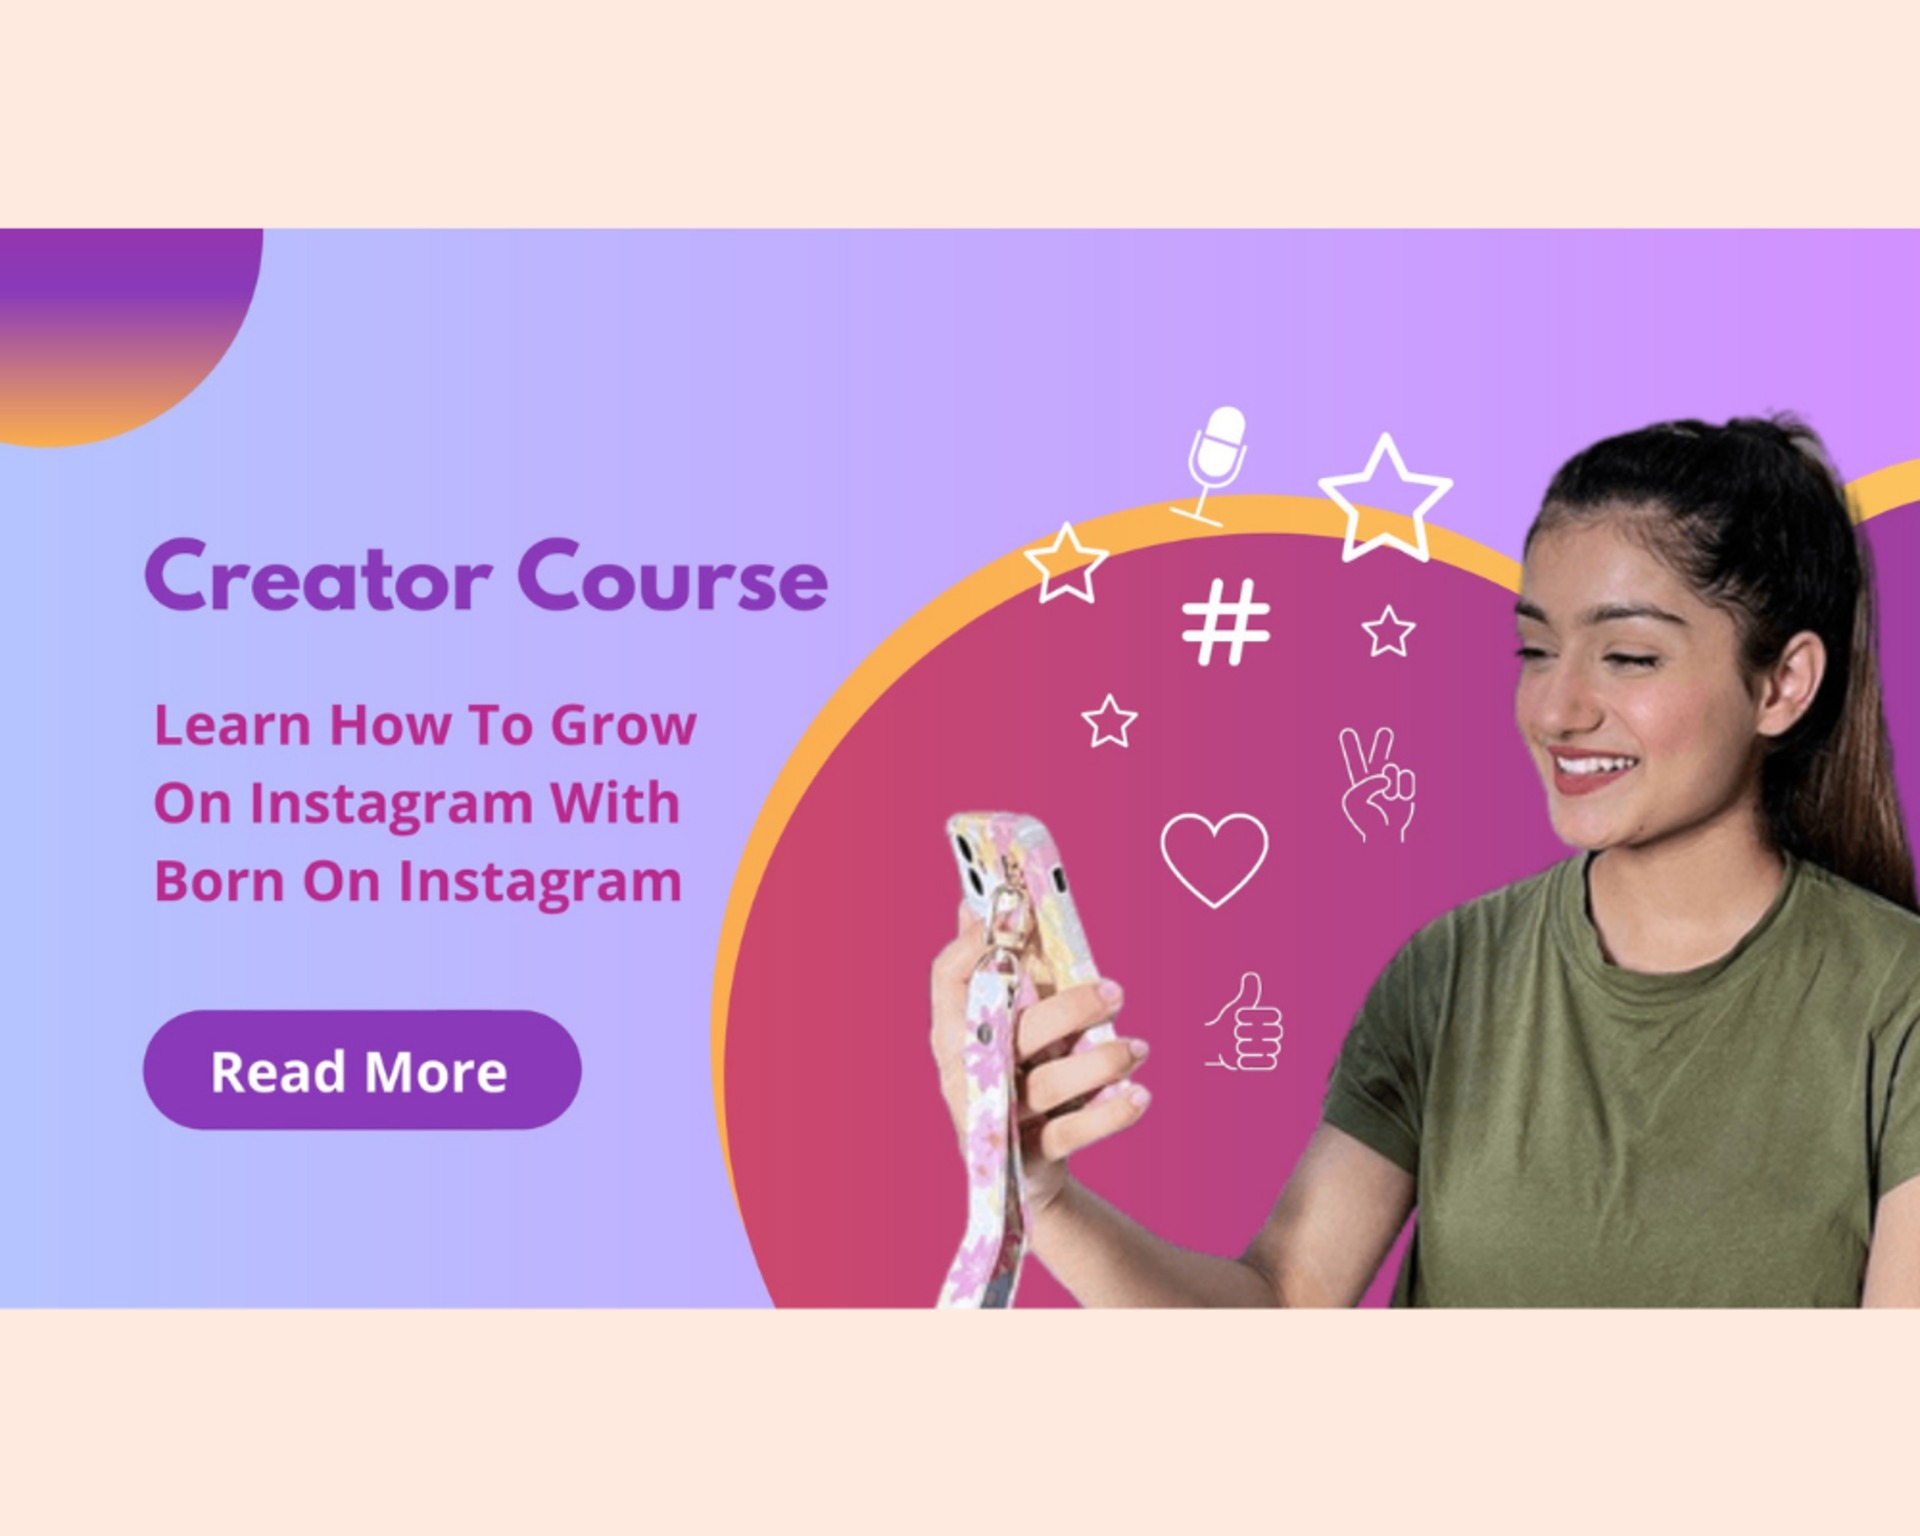 Learn How To Grow On Instagram With Born On Instagram Creator Course image